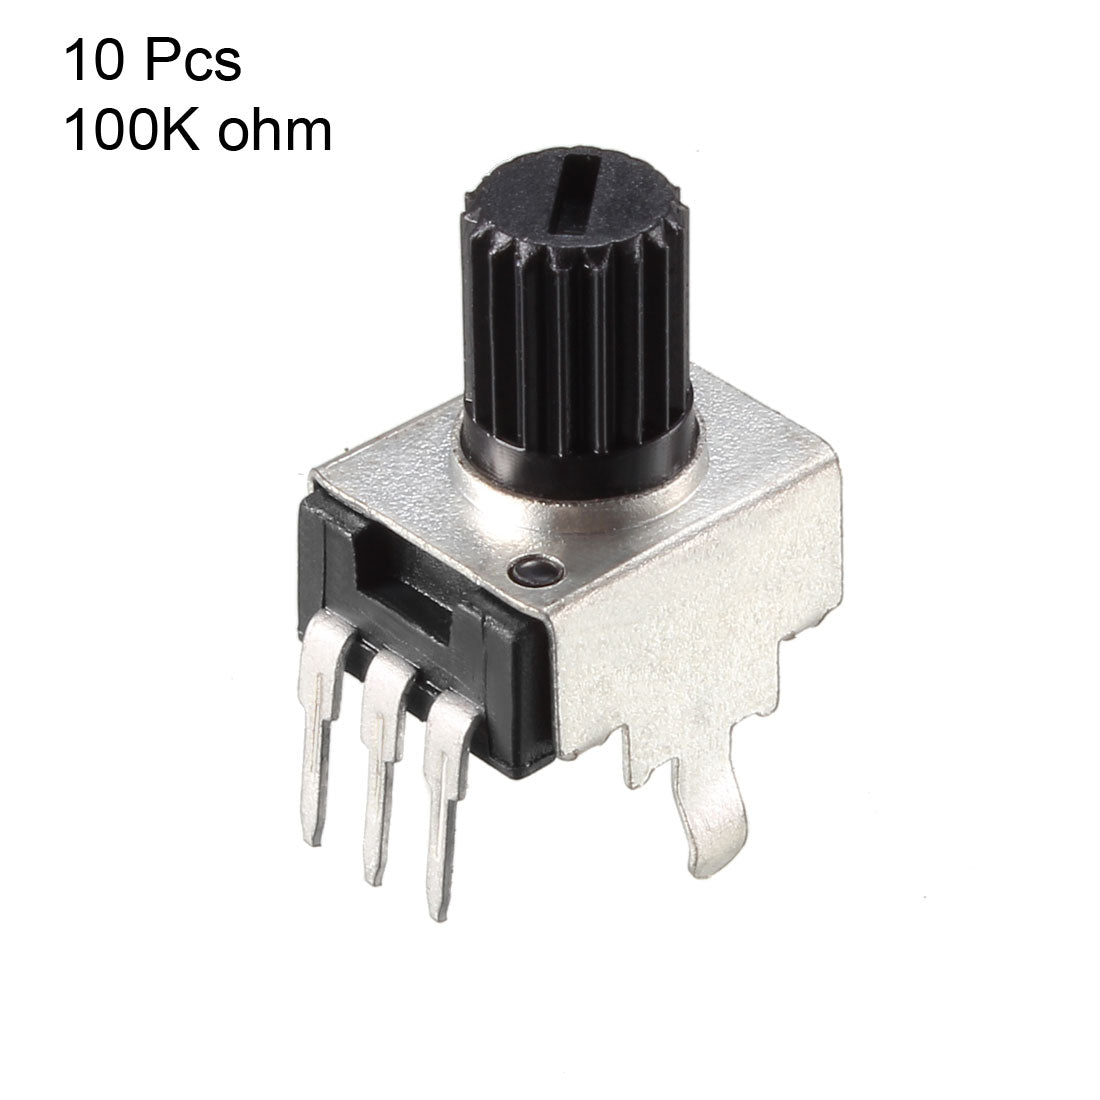 uxcell Uxcell Carbon Film Potentiometer 100K Ohm Variable Resistors Single Turn Rotary, 10pcs